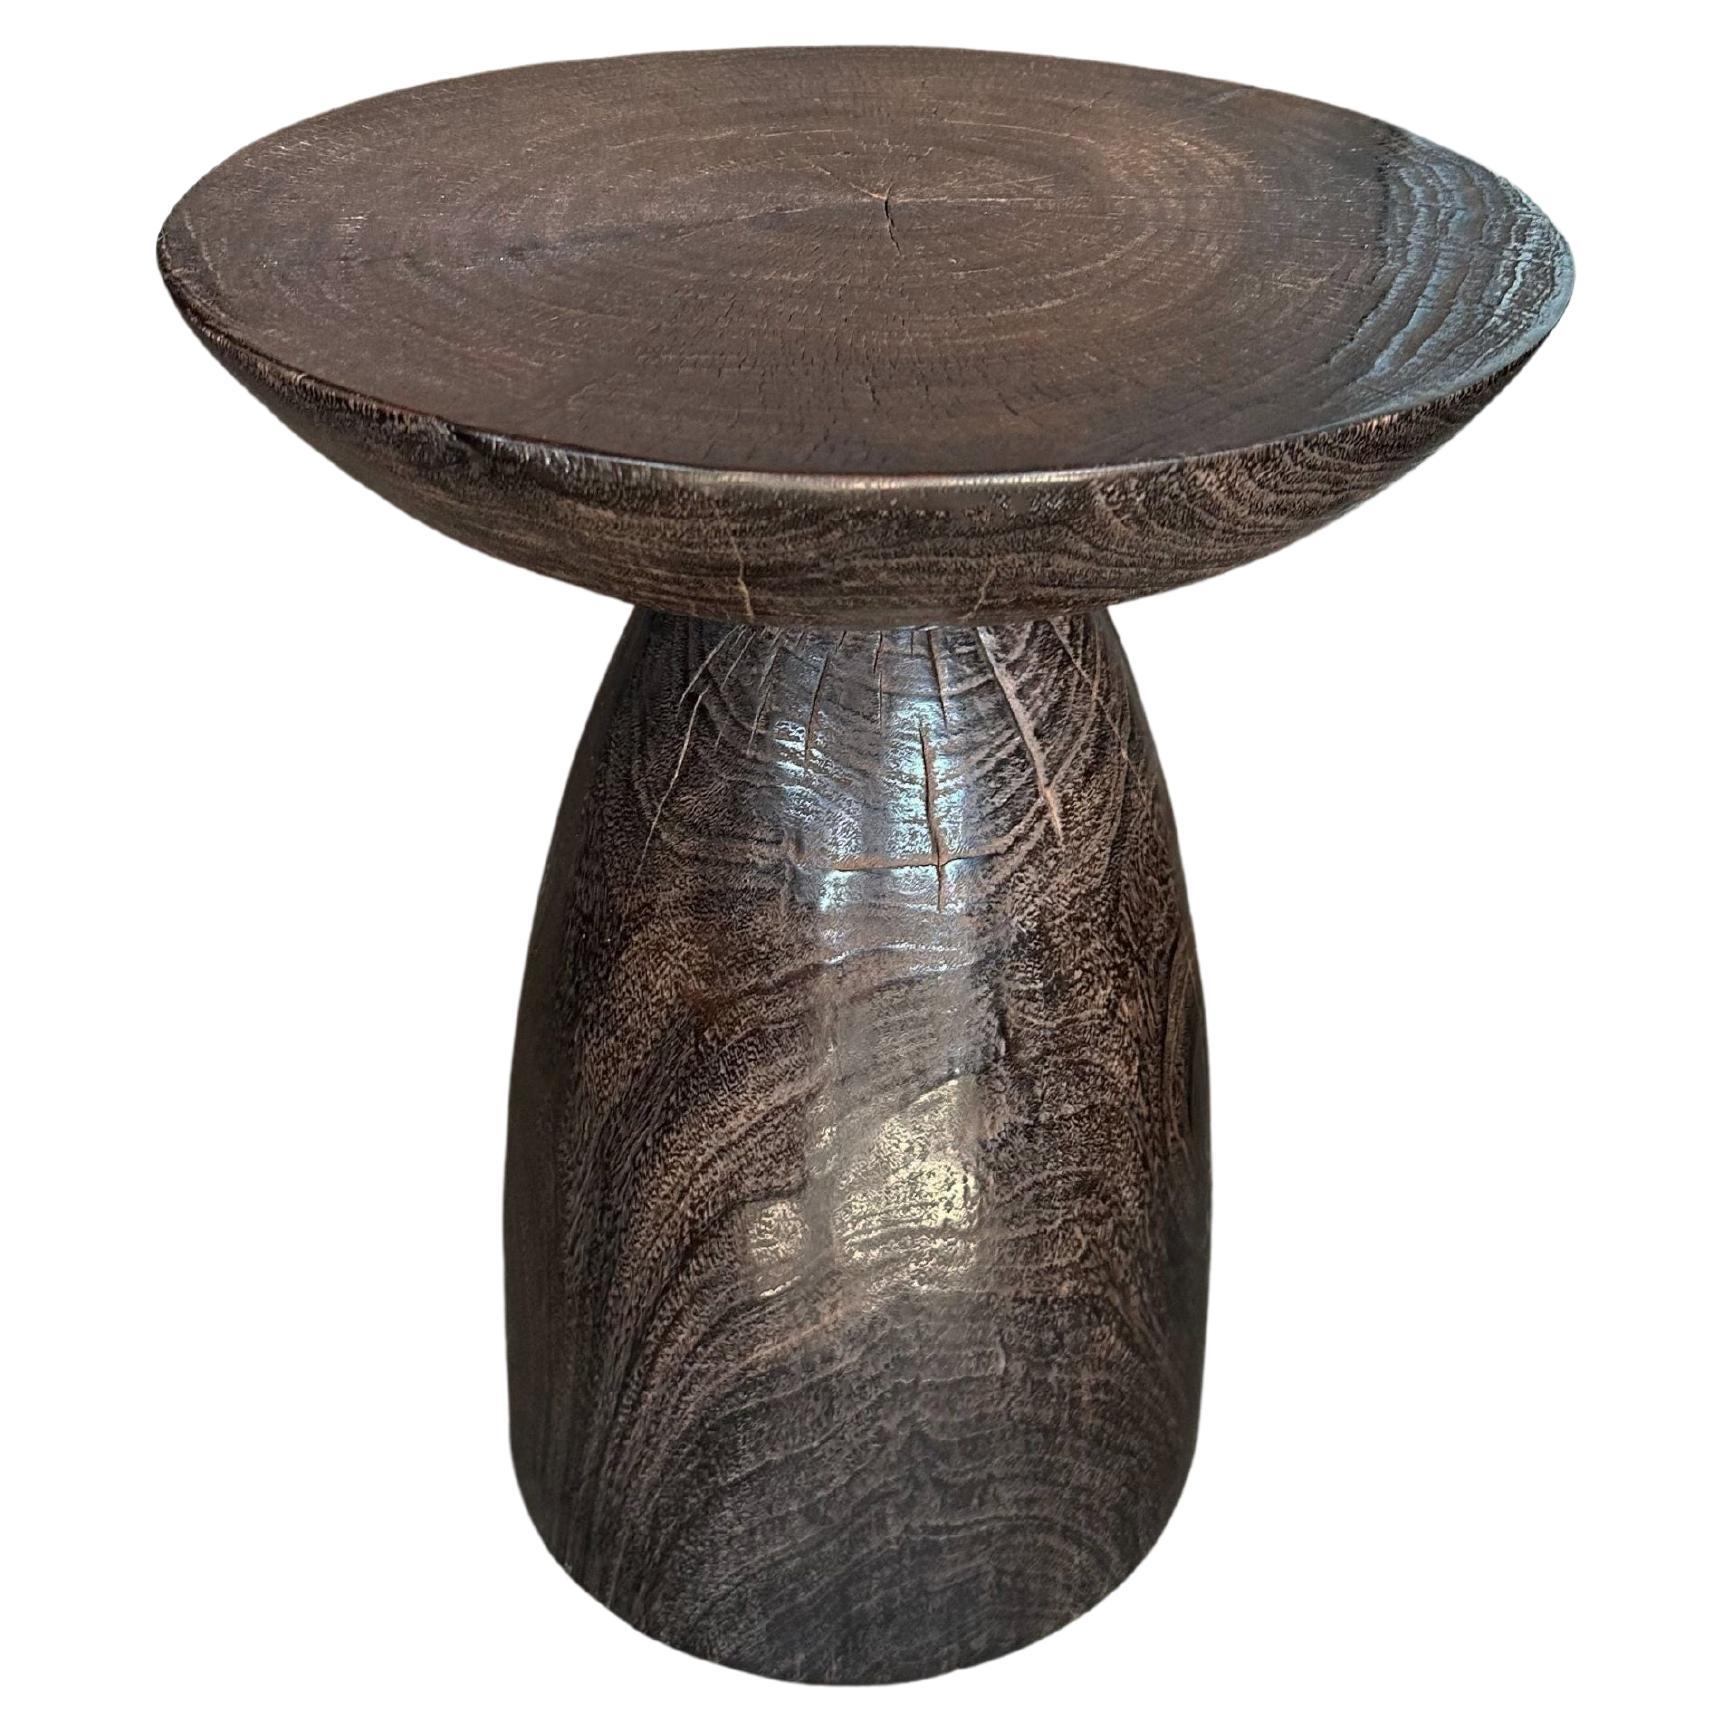 Solid Mango Wood Side Table with Espresso Finish, Modern Organic For Sale